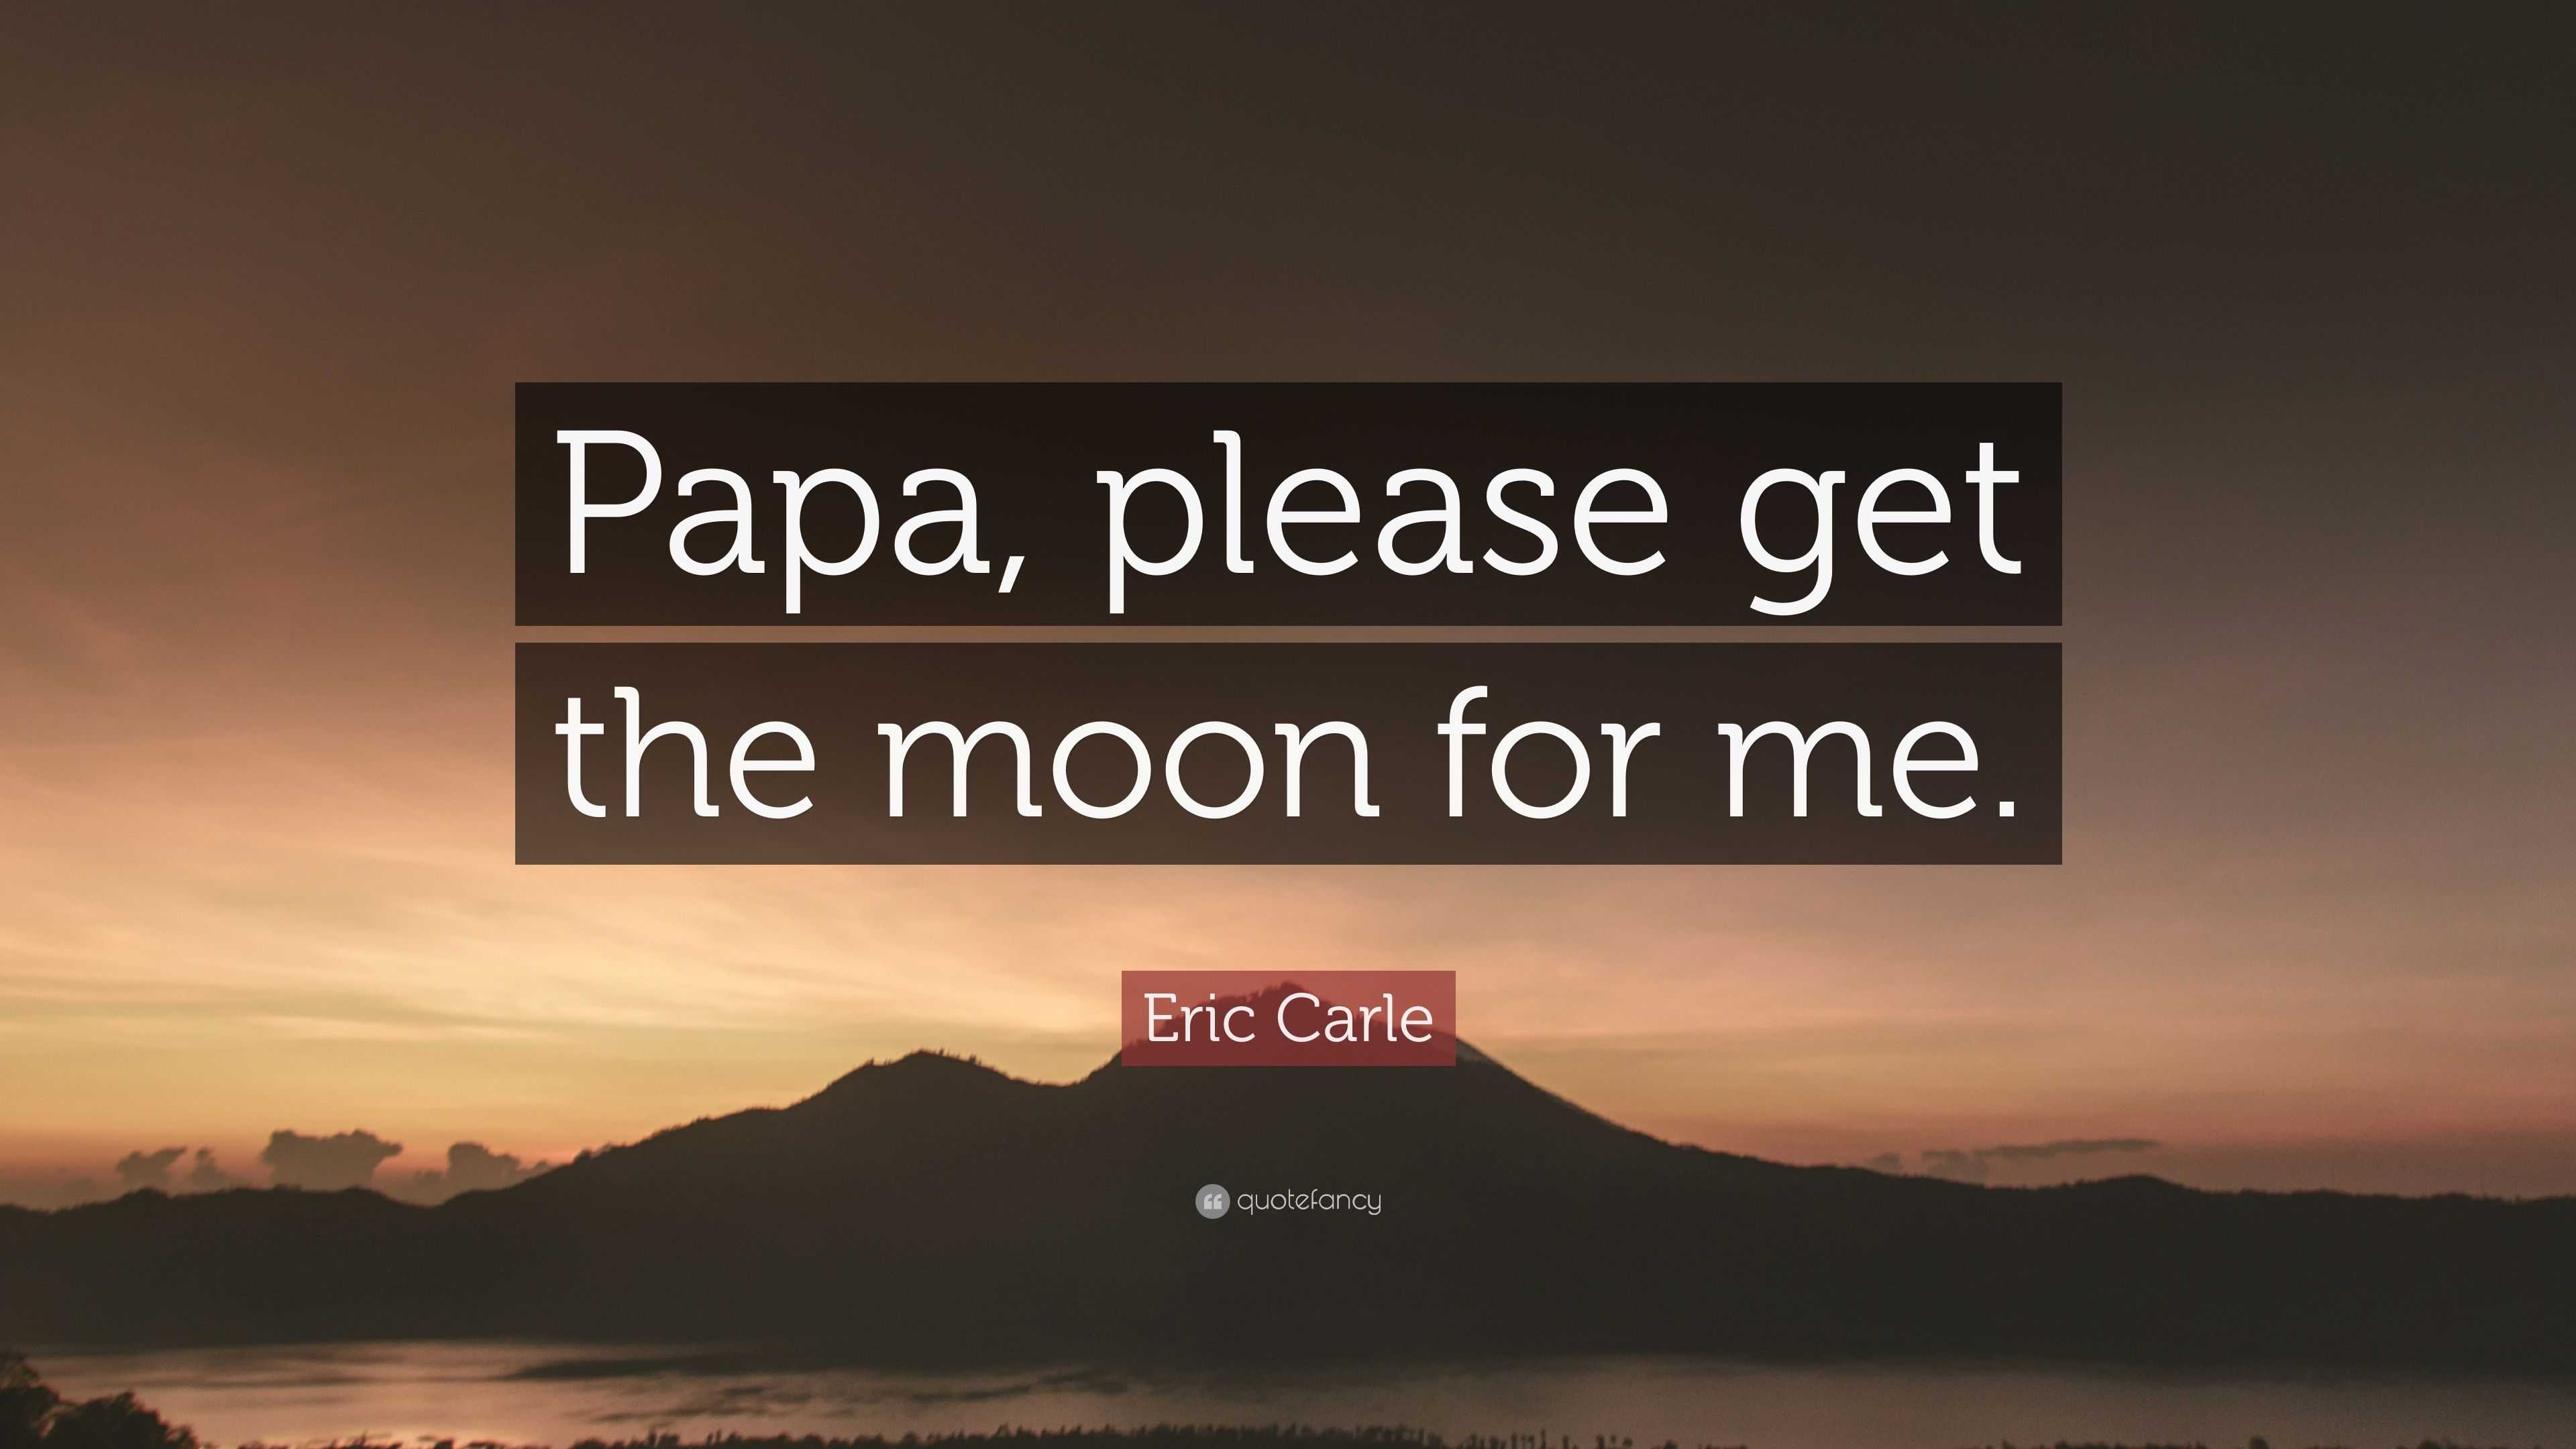 eric carle papa get the moon for me